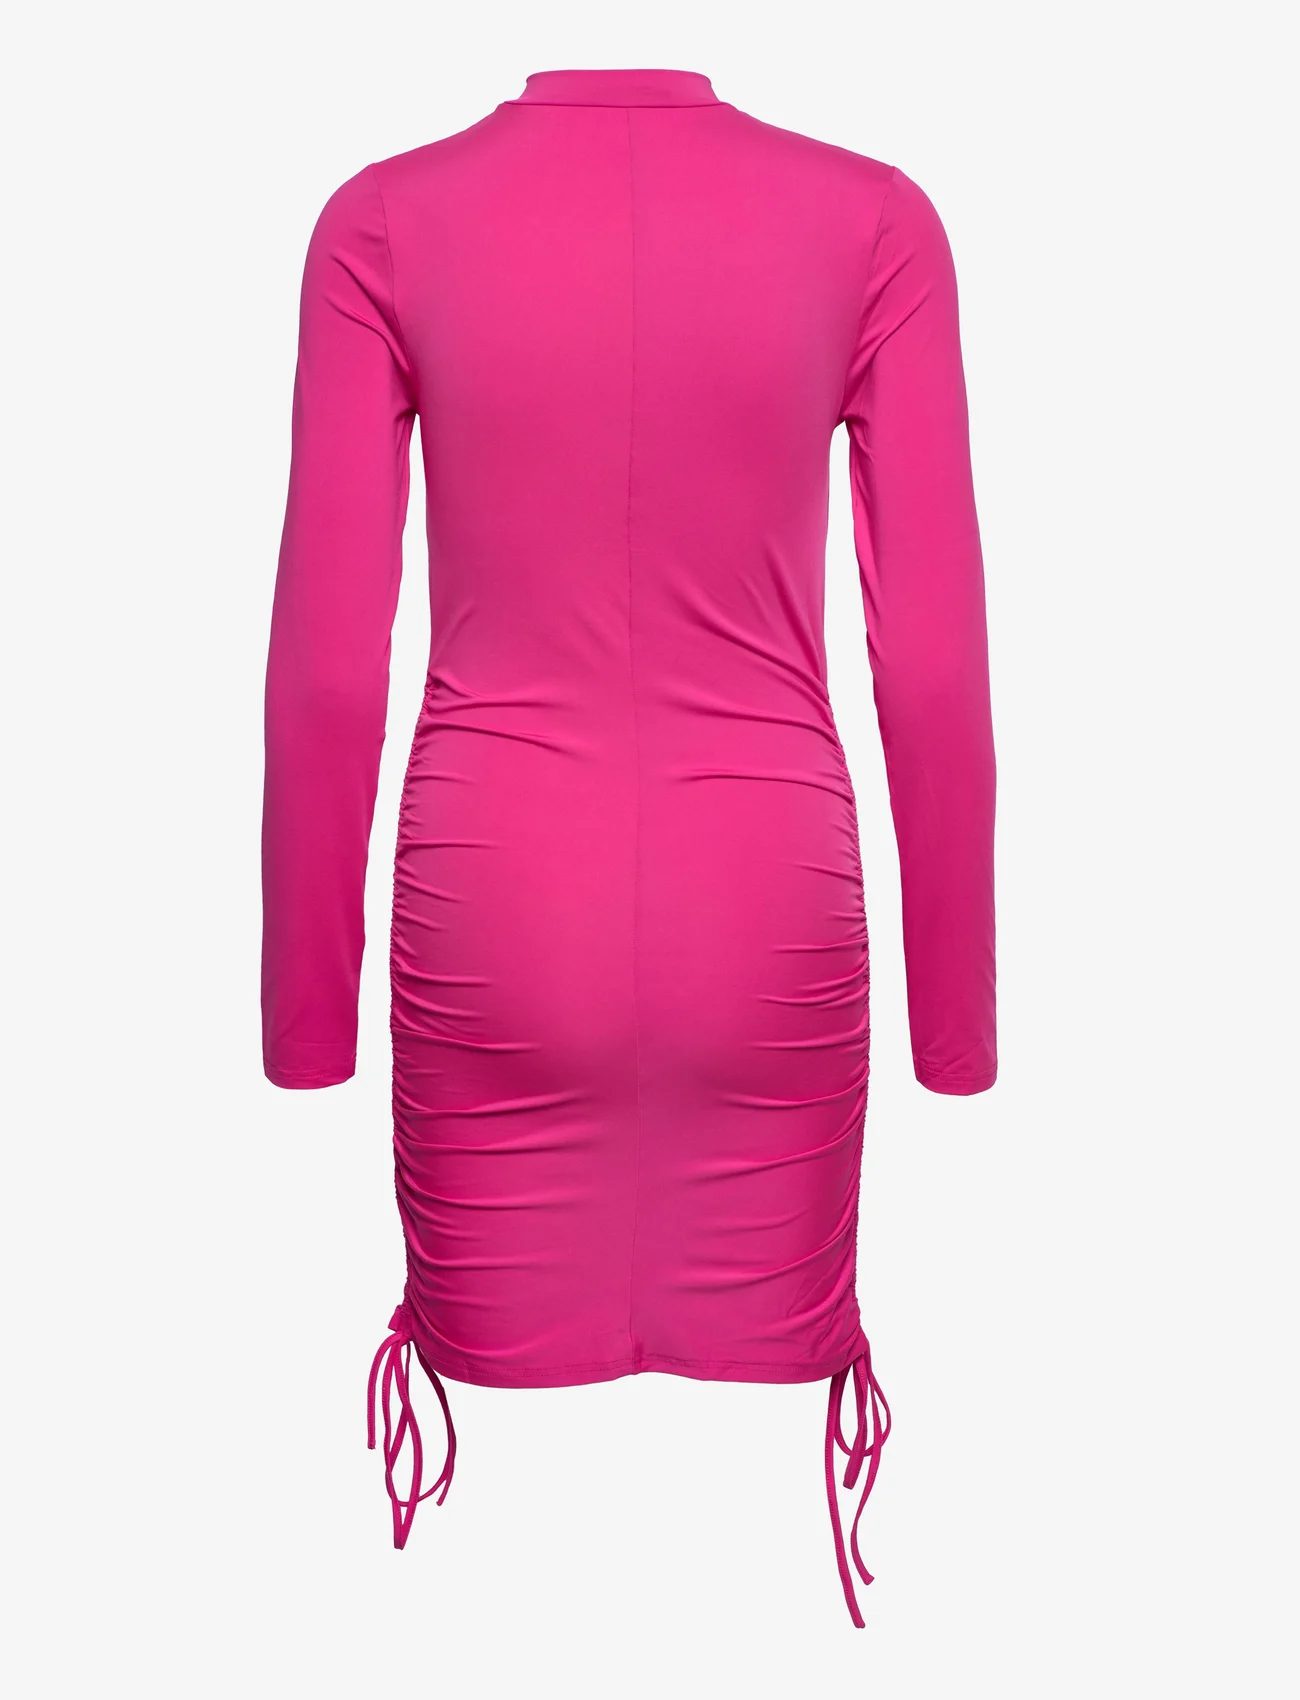 bzr - Power Visale dress - party wear at outlet prices - pink - 1